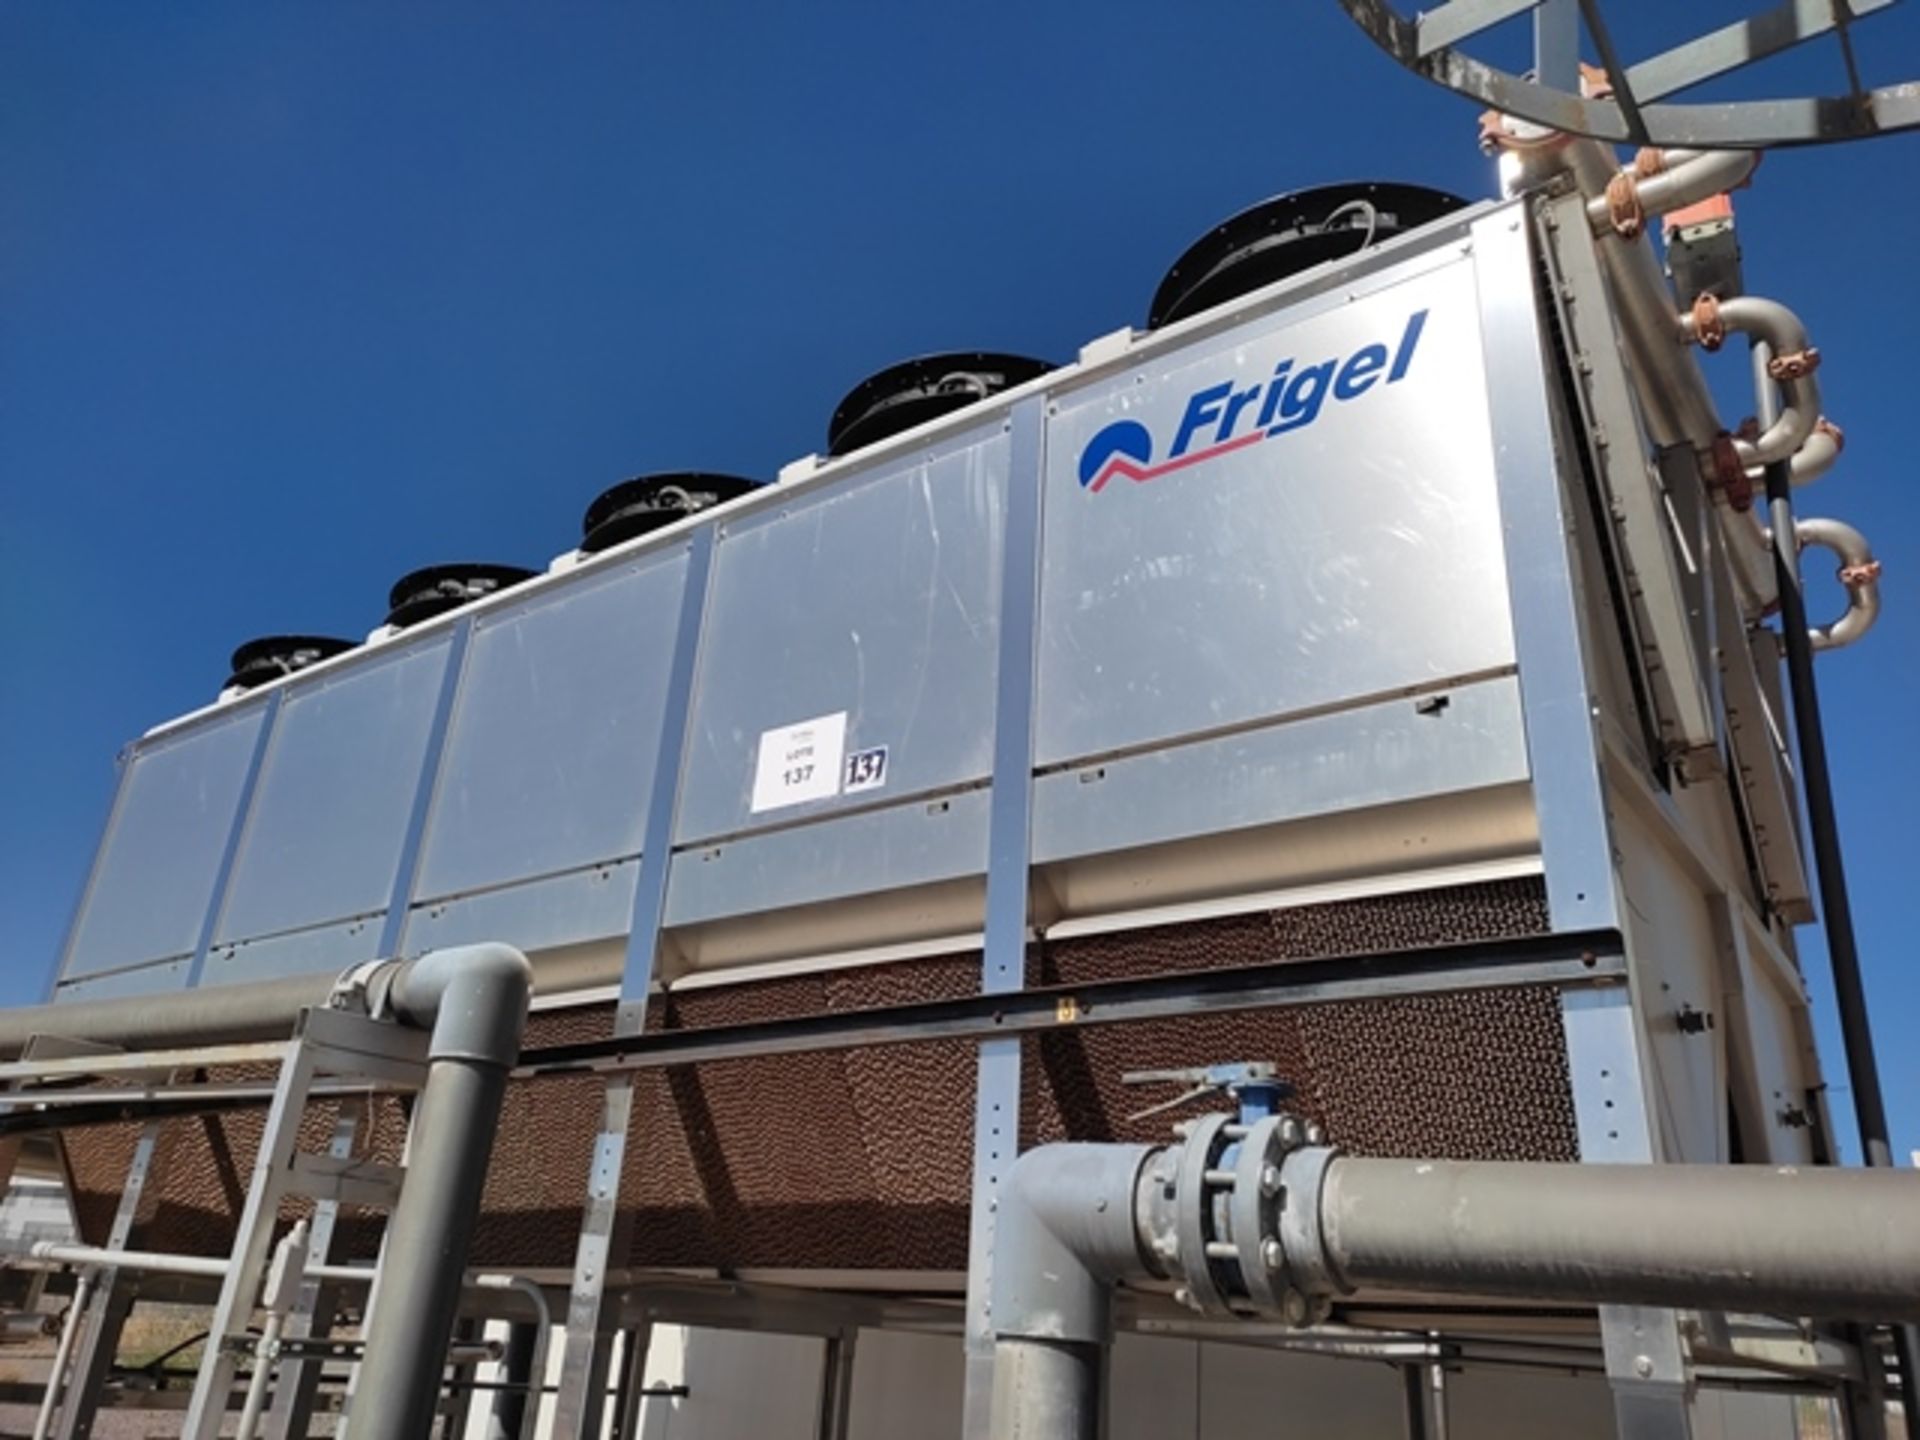 Frigel Ecodry 3DK 52 DS EZ +84 Cooling Tower, Serial: 1610113T; Year: 2016 - Image 3 of 9